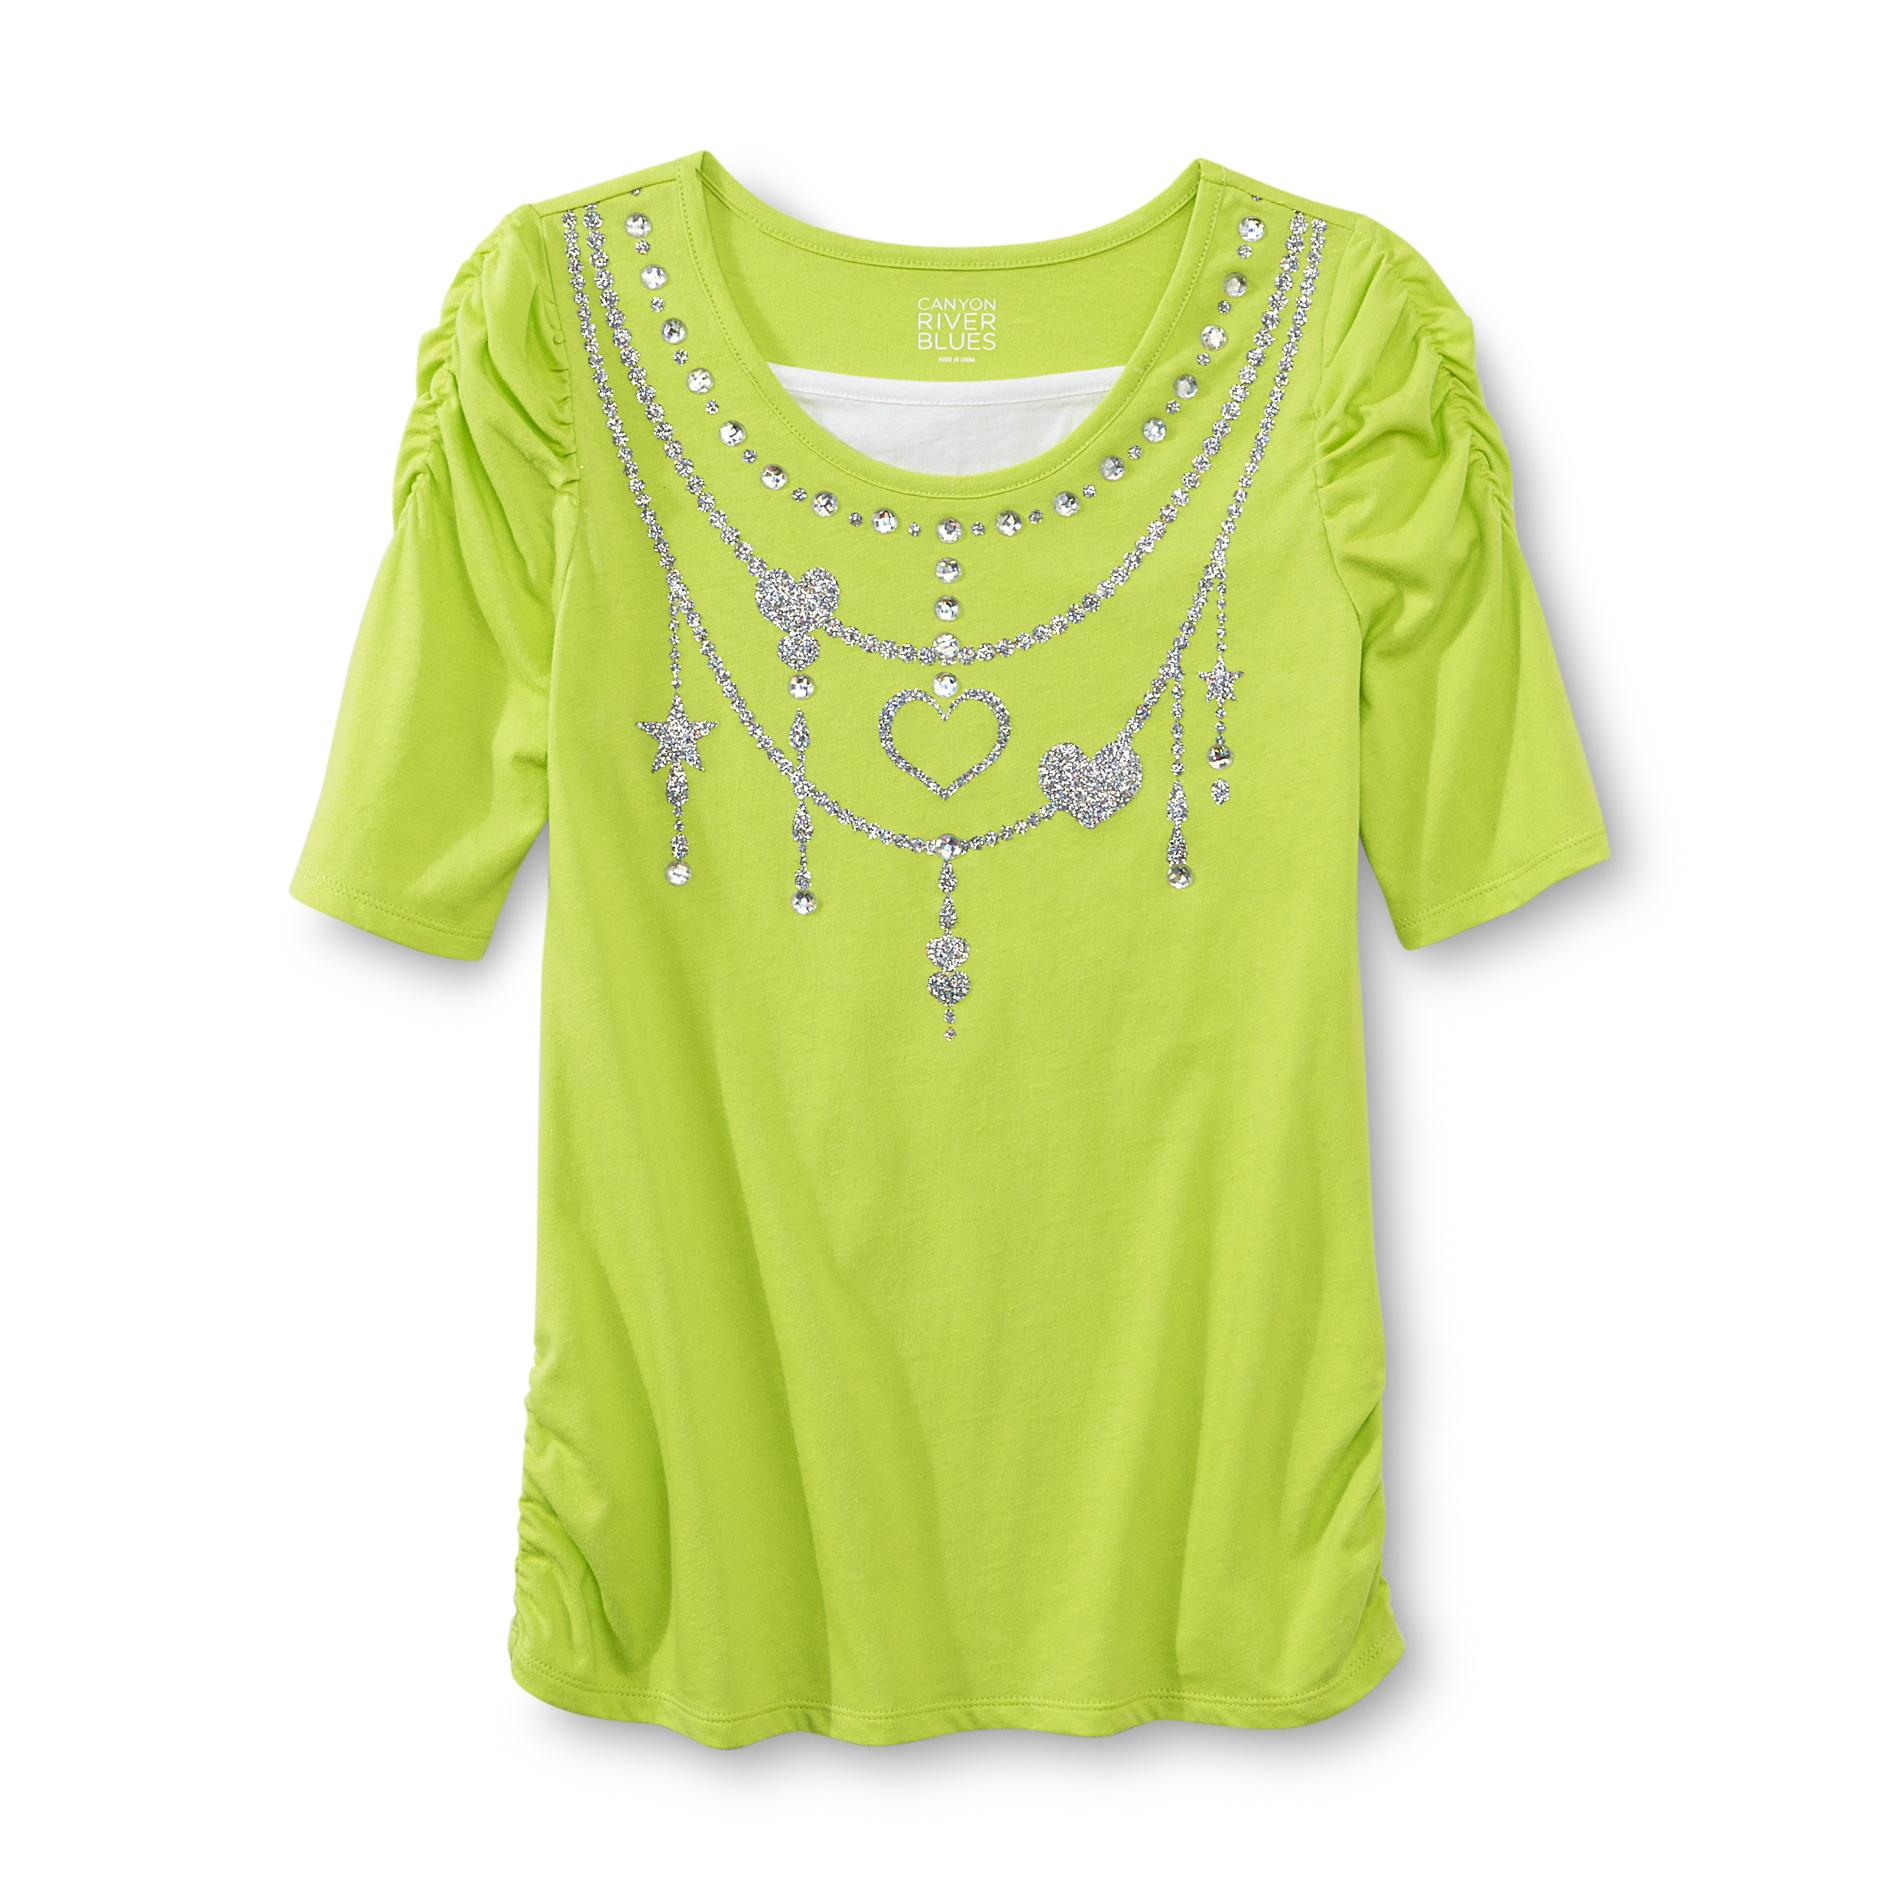 Canyon River Blues Girl's Embellished Layered Look Shirt